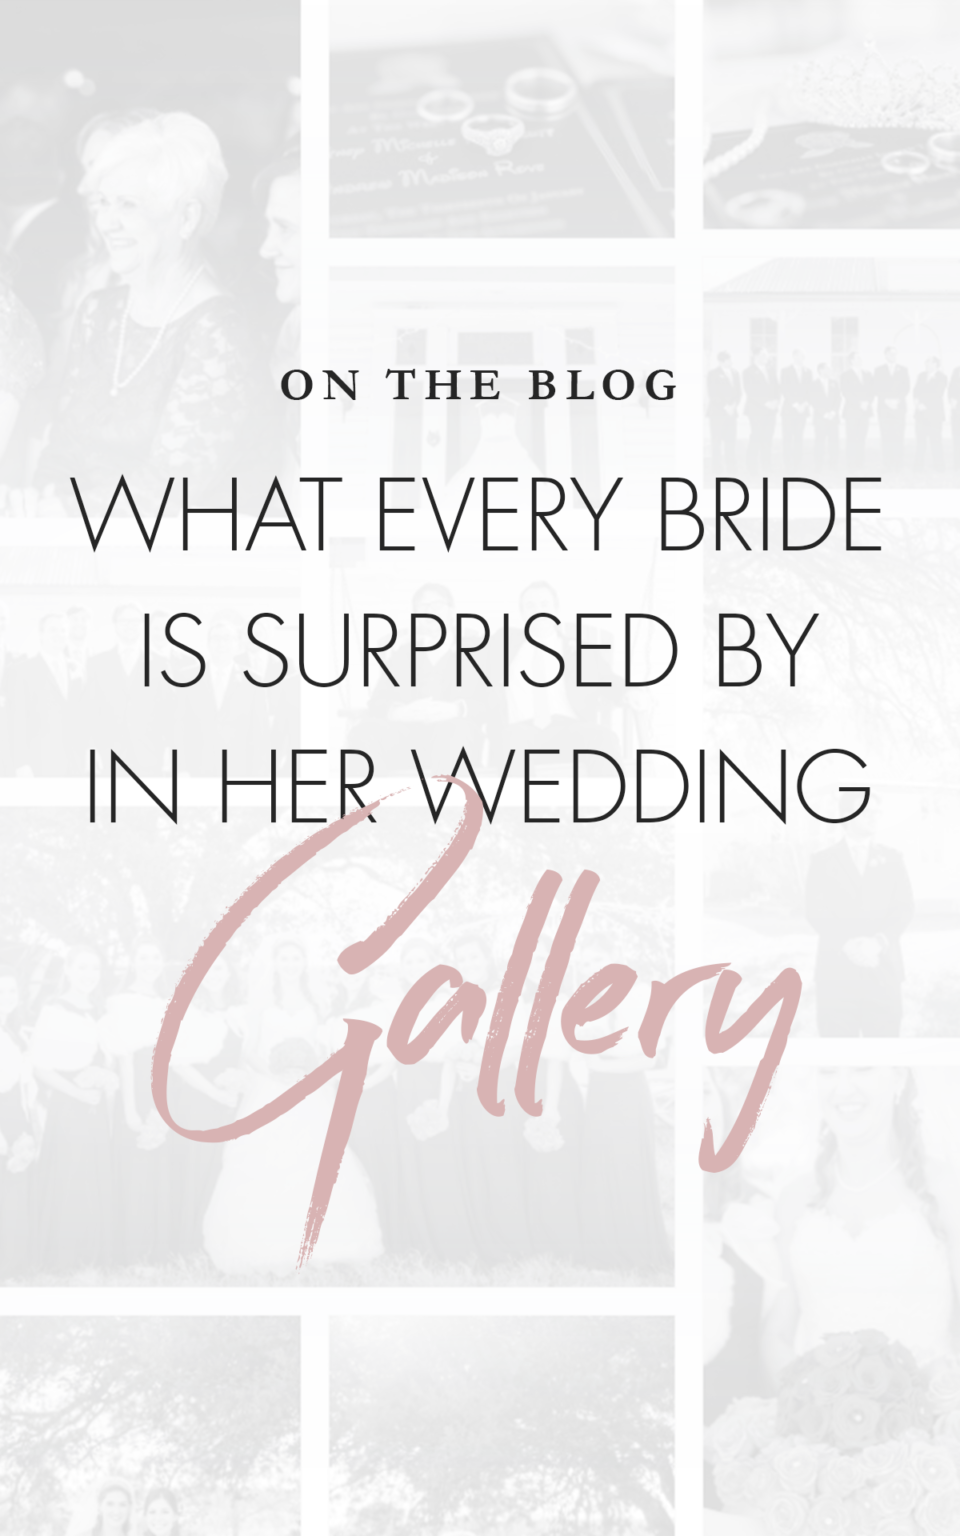 What Every Bride is Surprised By in Her Wedding Gallery